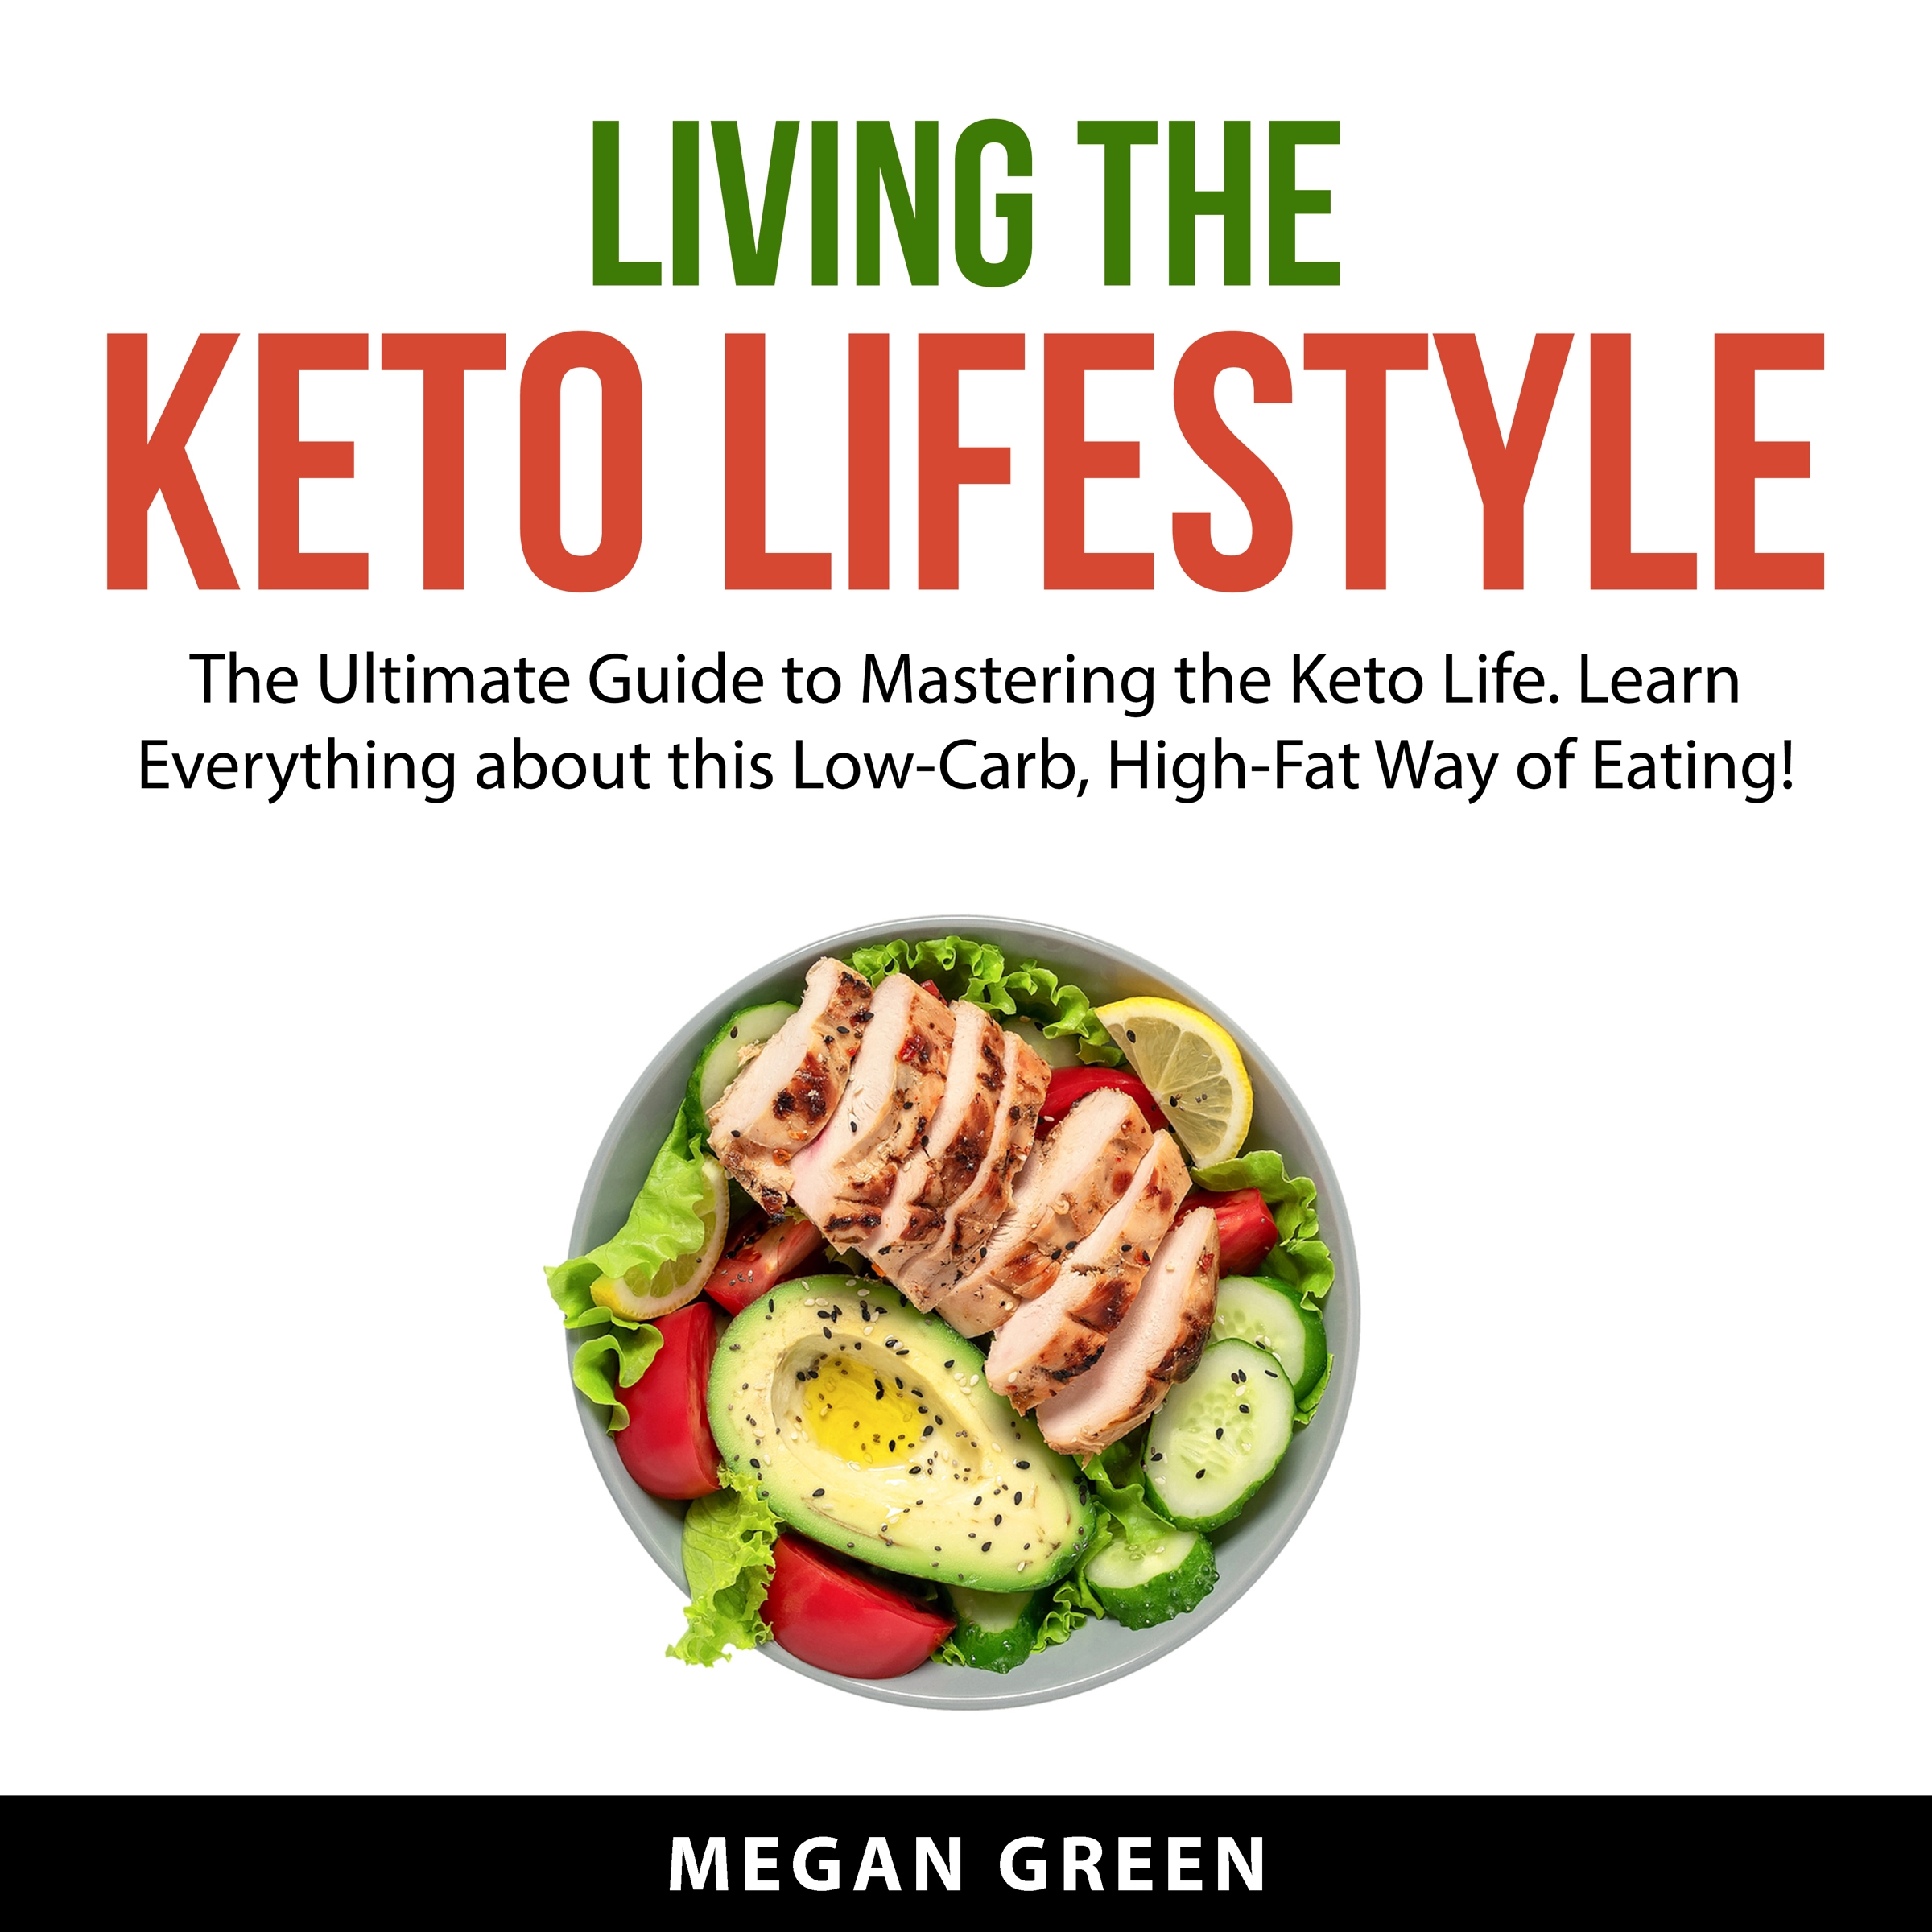 Living the Keto Lifestyle Audiobook by Megan Green